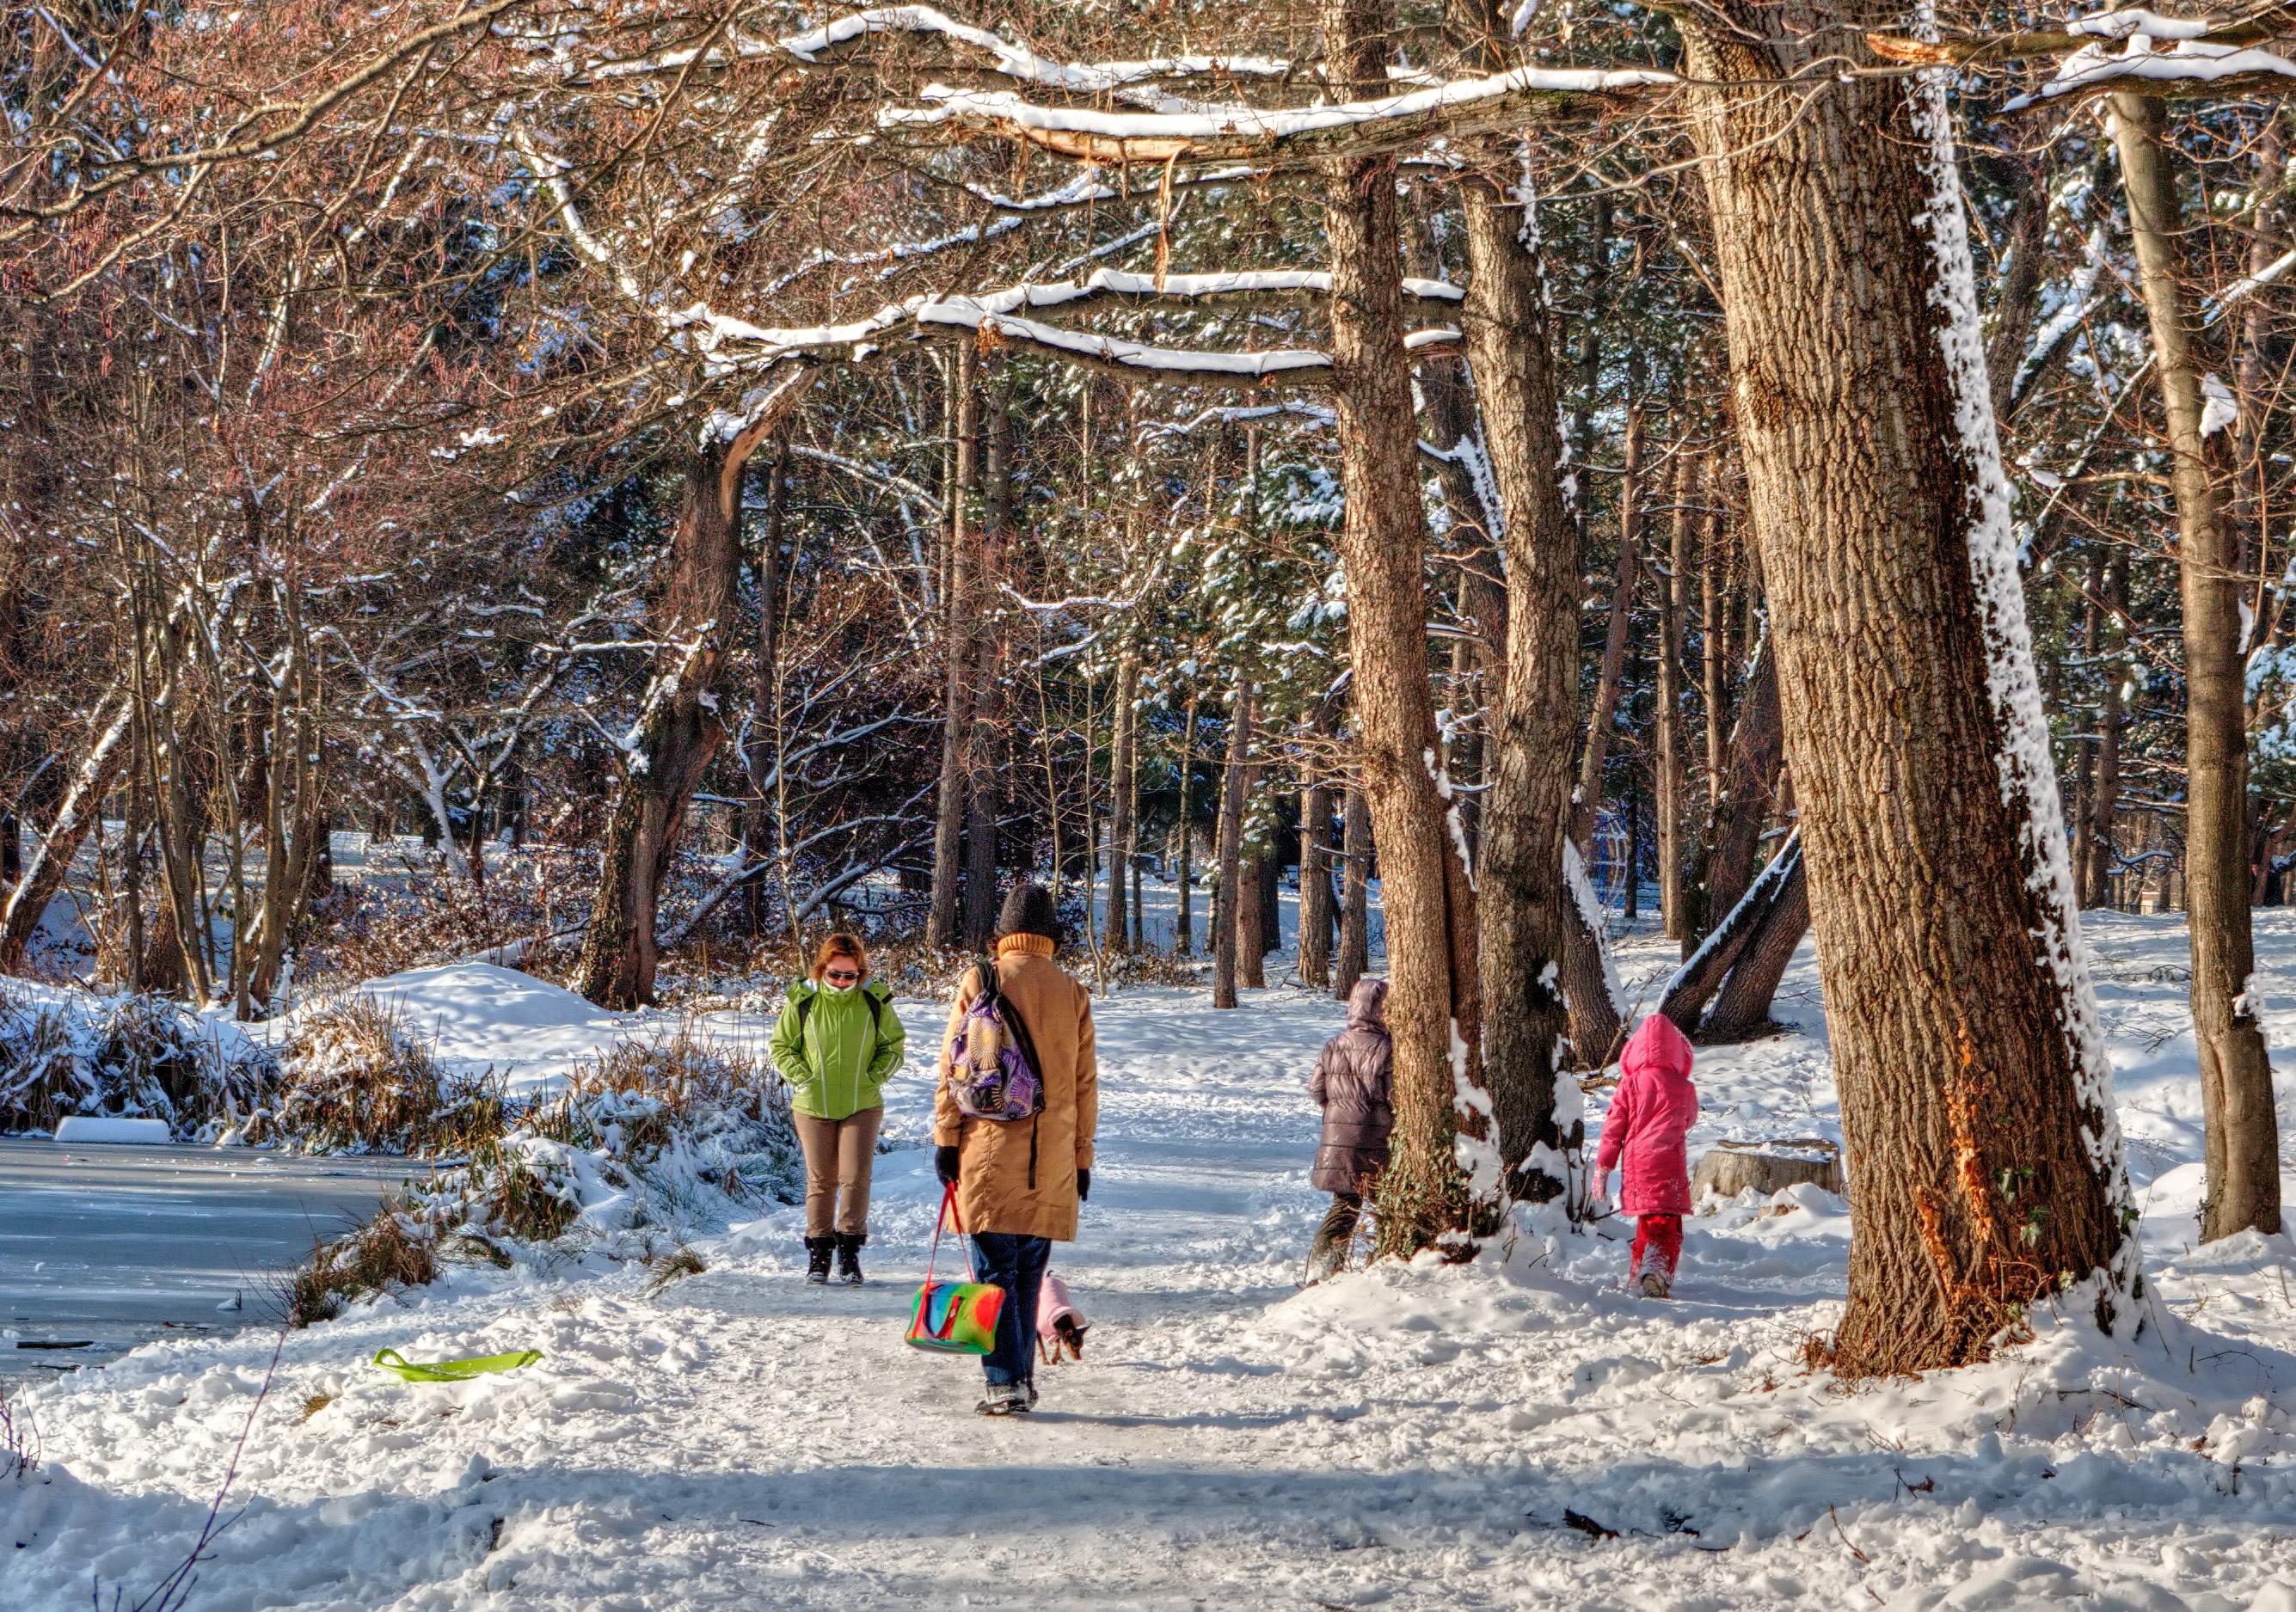 Despite the winter weather, you can enjoy some physical activity outdoors. (Photo courtesy of koan, morgueFile)